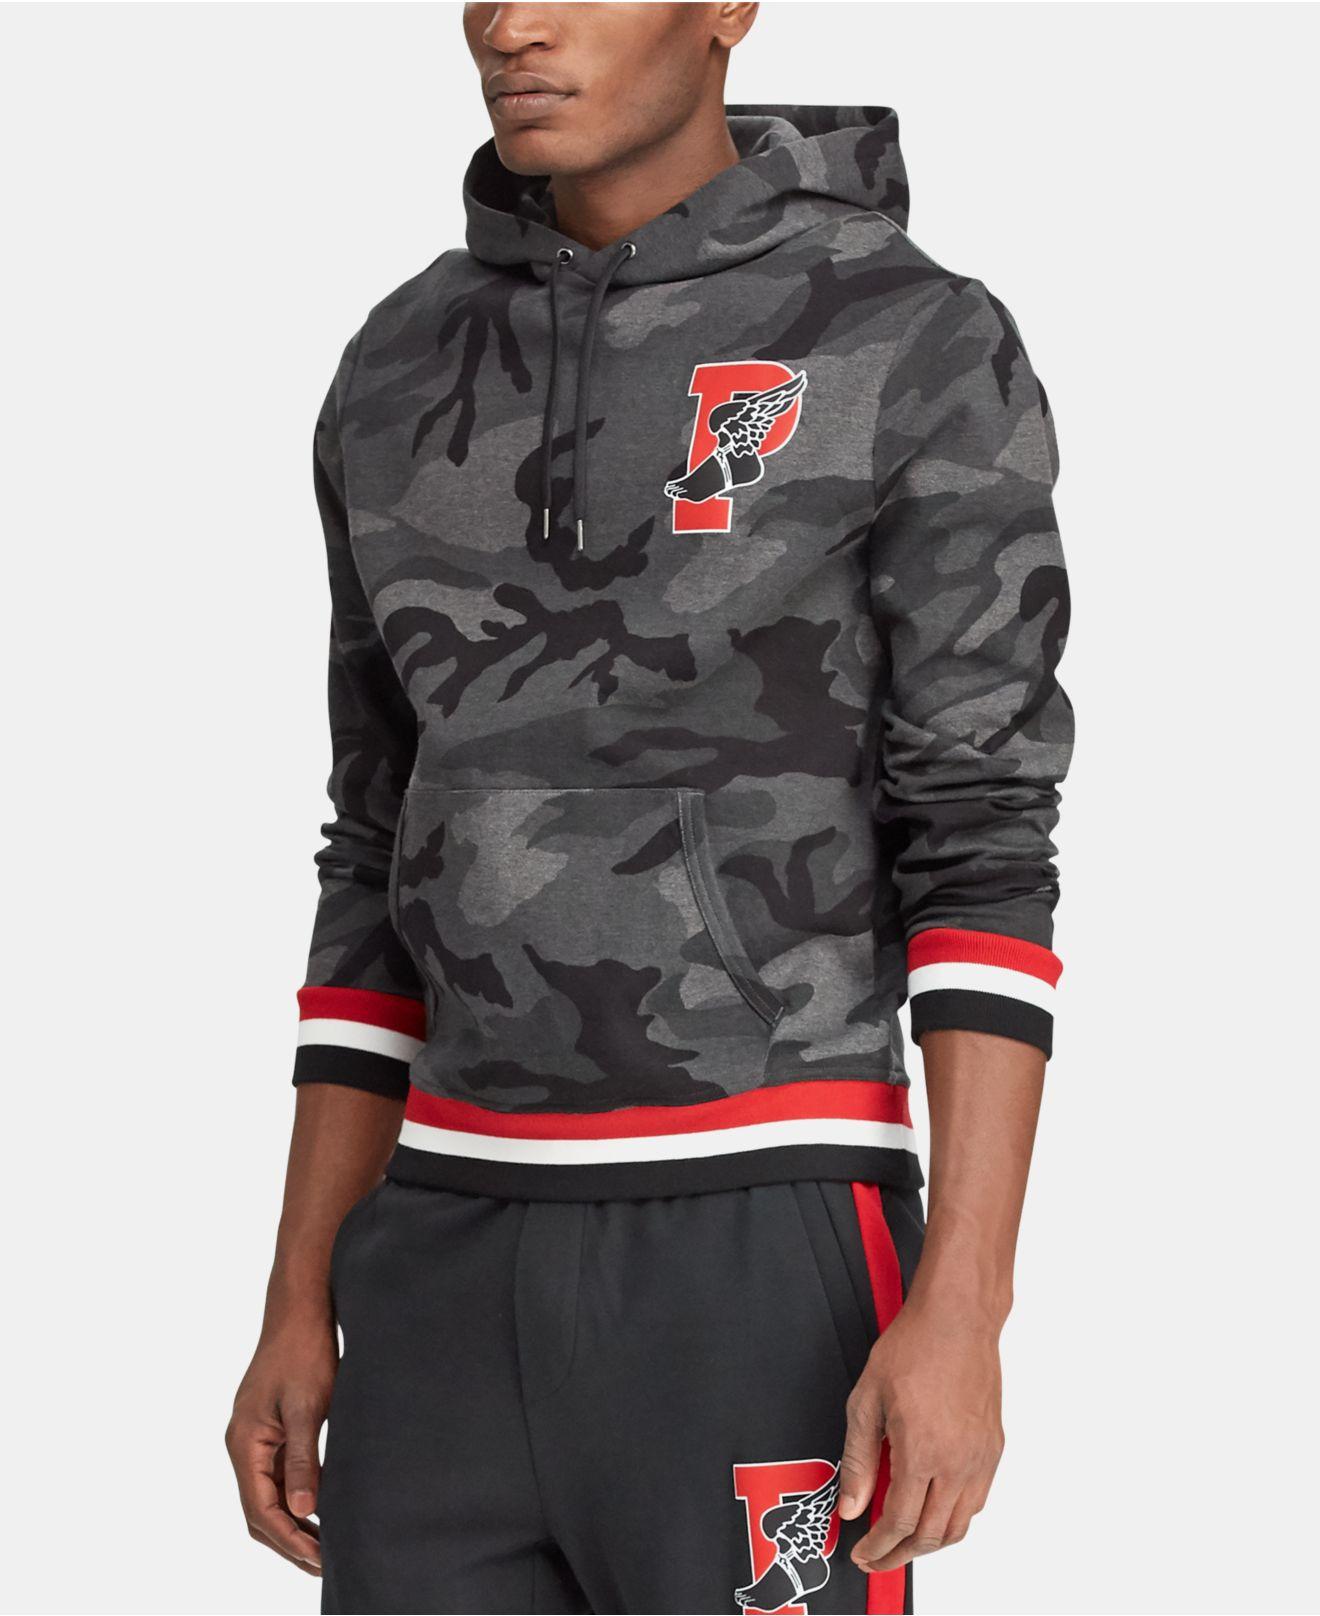 Polo Ralph Lauren Cotton Camouflage Hooded Sweatshirt in Charcoal rl Camo  (Gray) for Men - Lyst